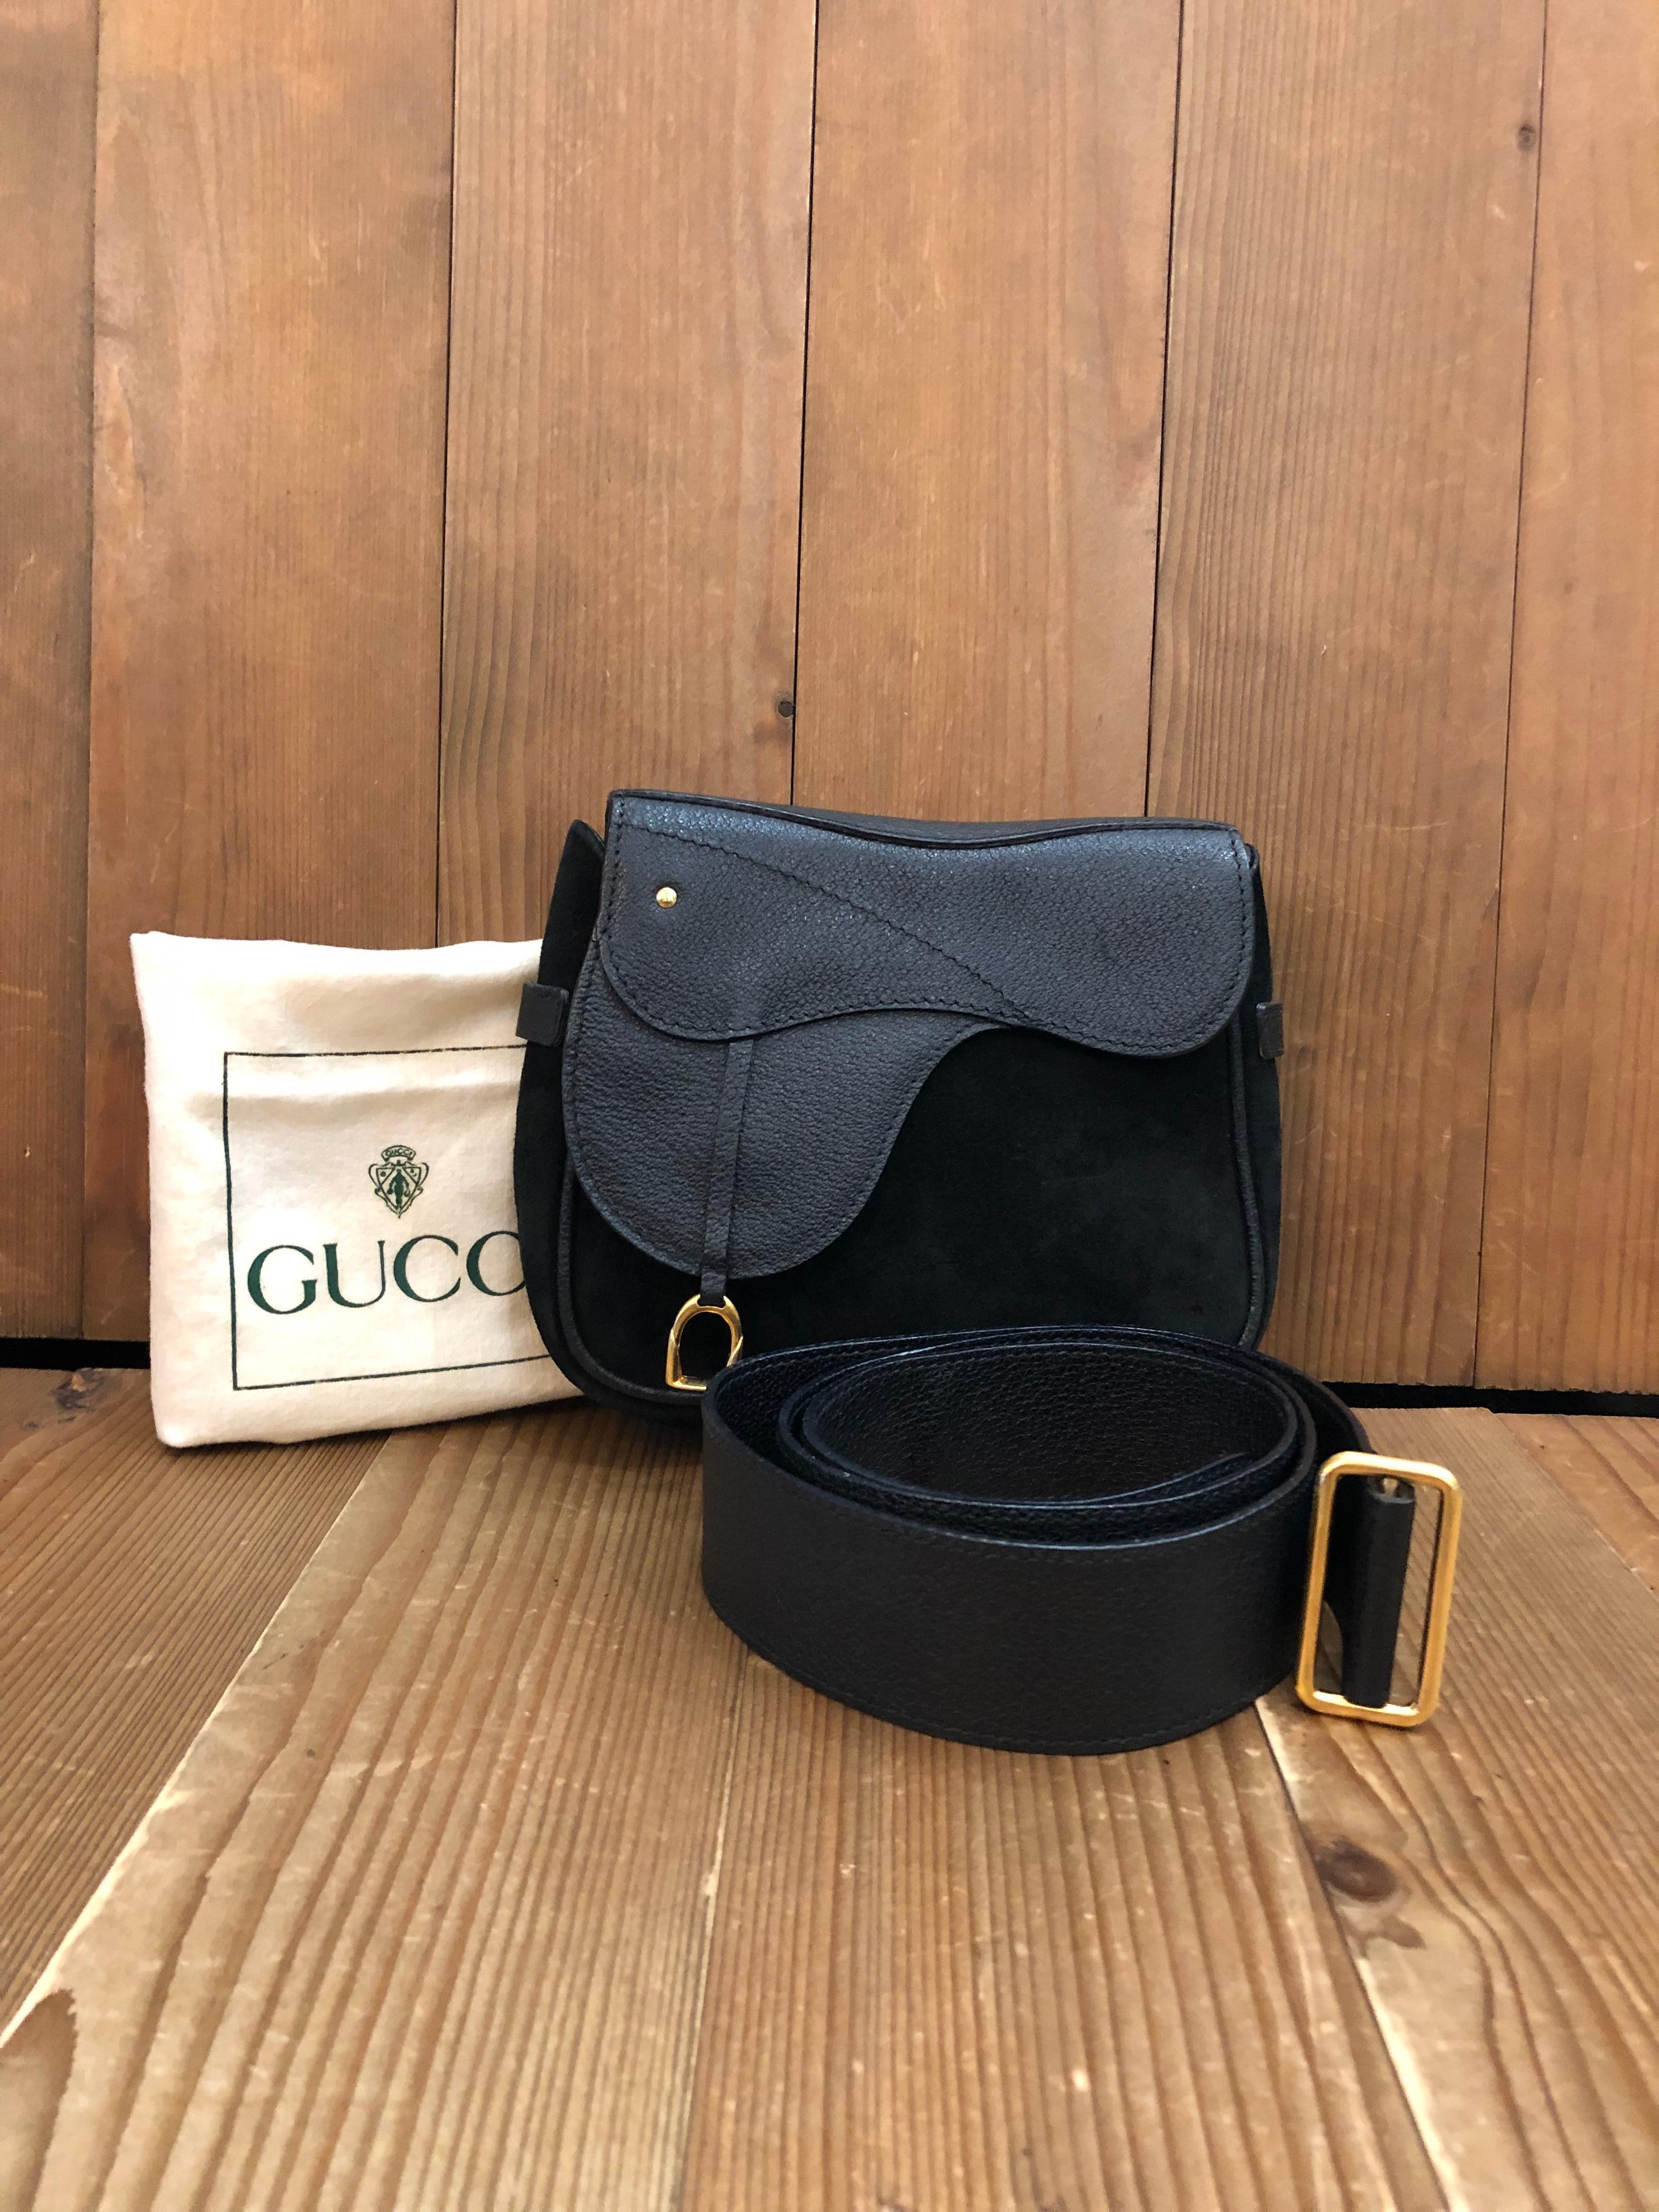 This vintage GUCCI mini saddle belt bag is crafted of pigskin and nubuck leather in black featuring gold toned hardware. Front magnetic snap closure opens to a black diamanté jacquard interior. Made in Italy. Measures approximately 6.5 x 6 x 1.5